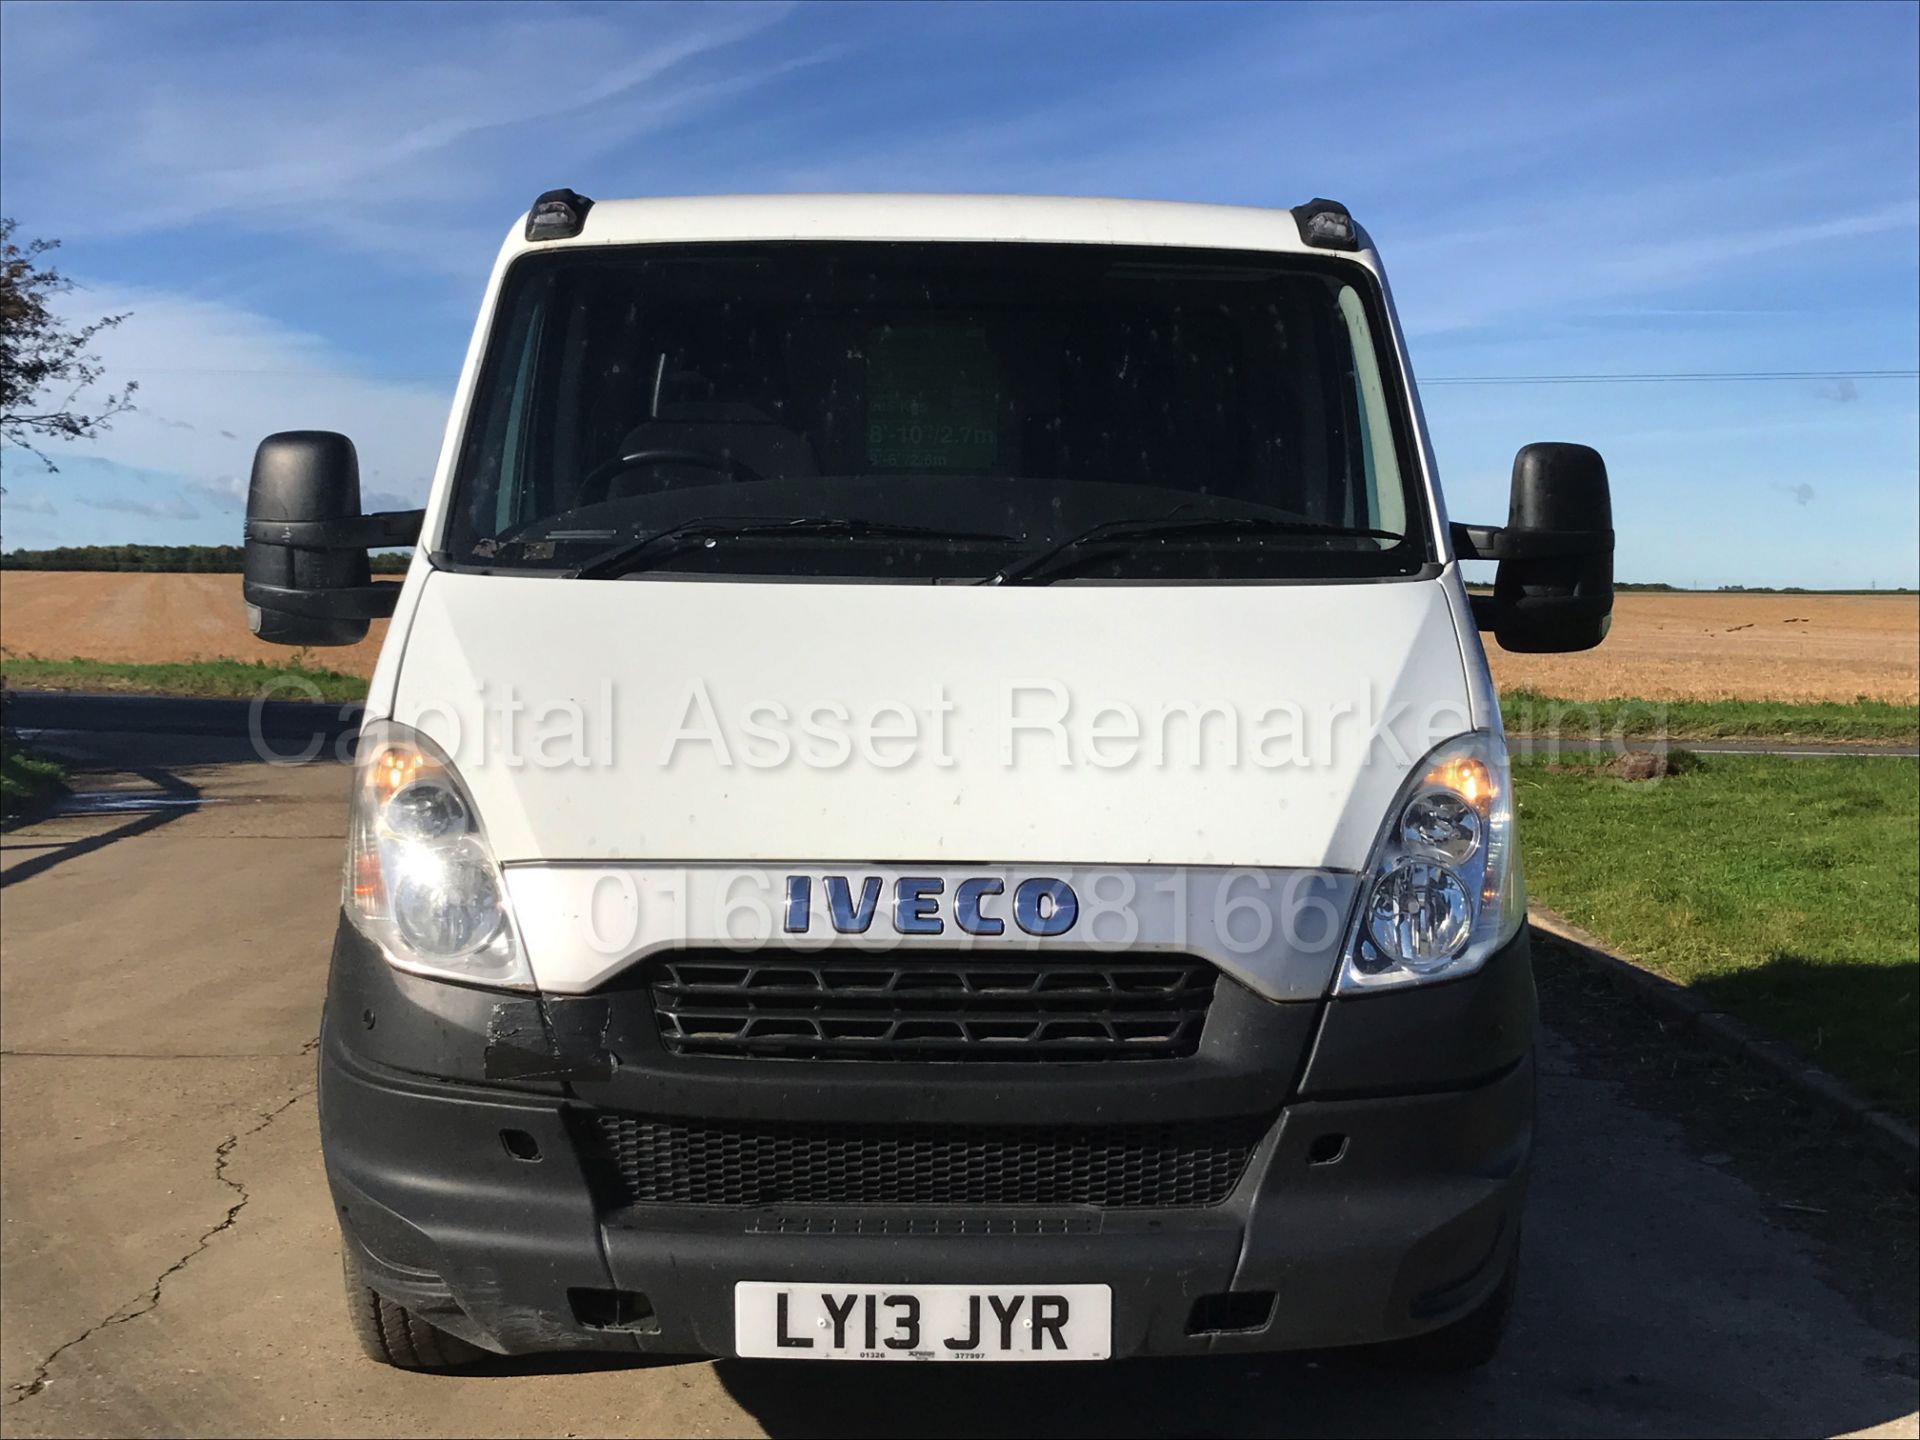 IVECO DAILY 35S11 'LWB - RECOVERY TRUCK' (2013 - 13 REG) '2.3 DIESEL - 110 BHP' (1 OWNER) - Image 12 of 20